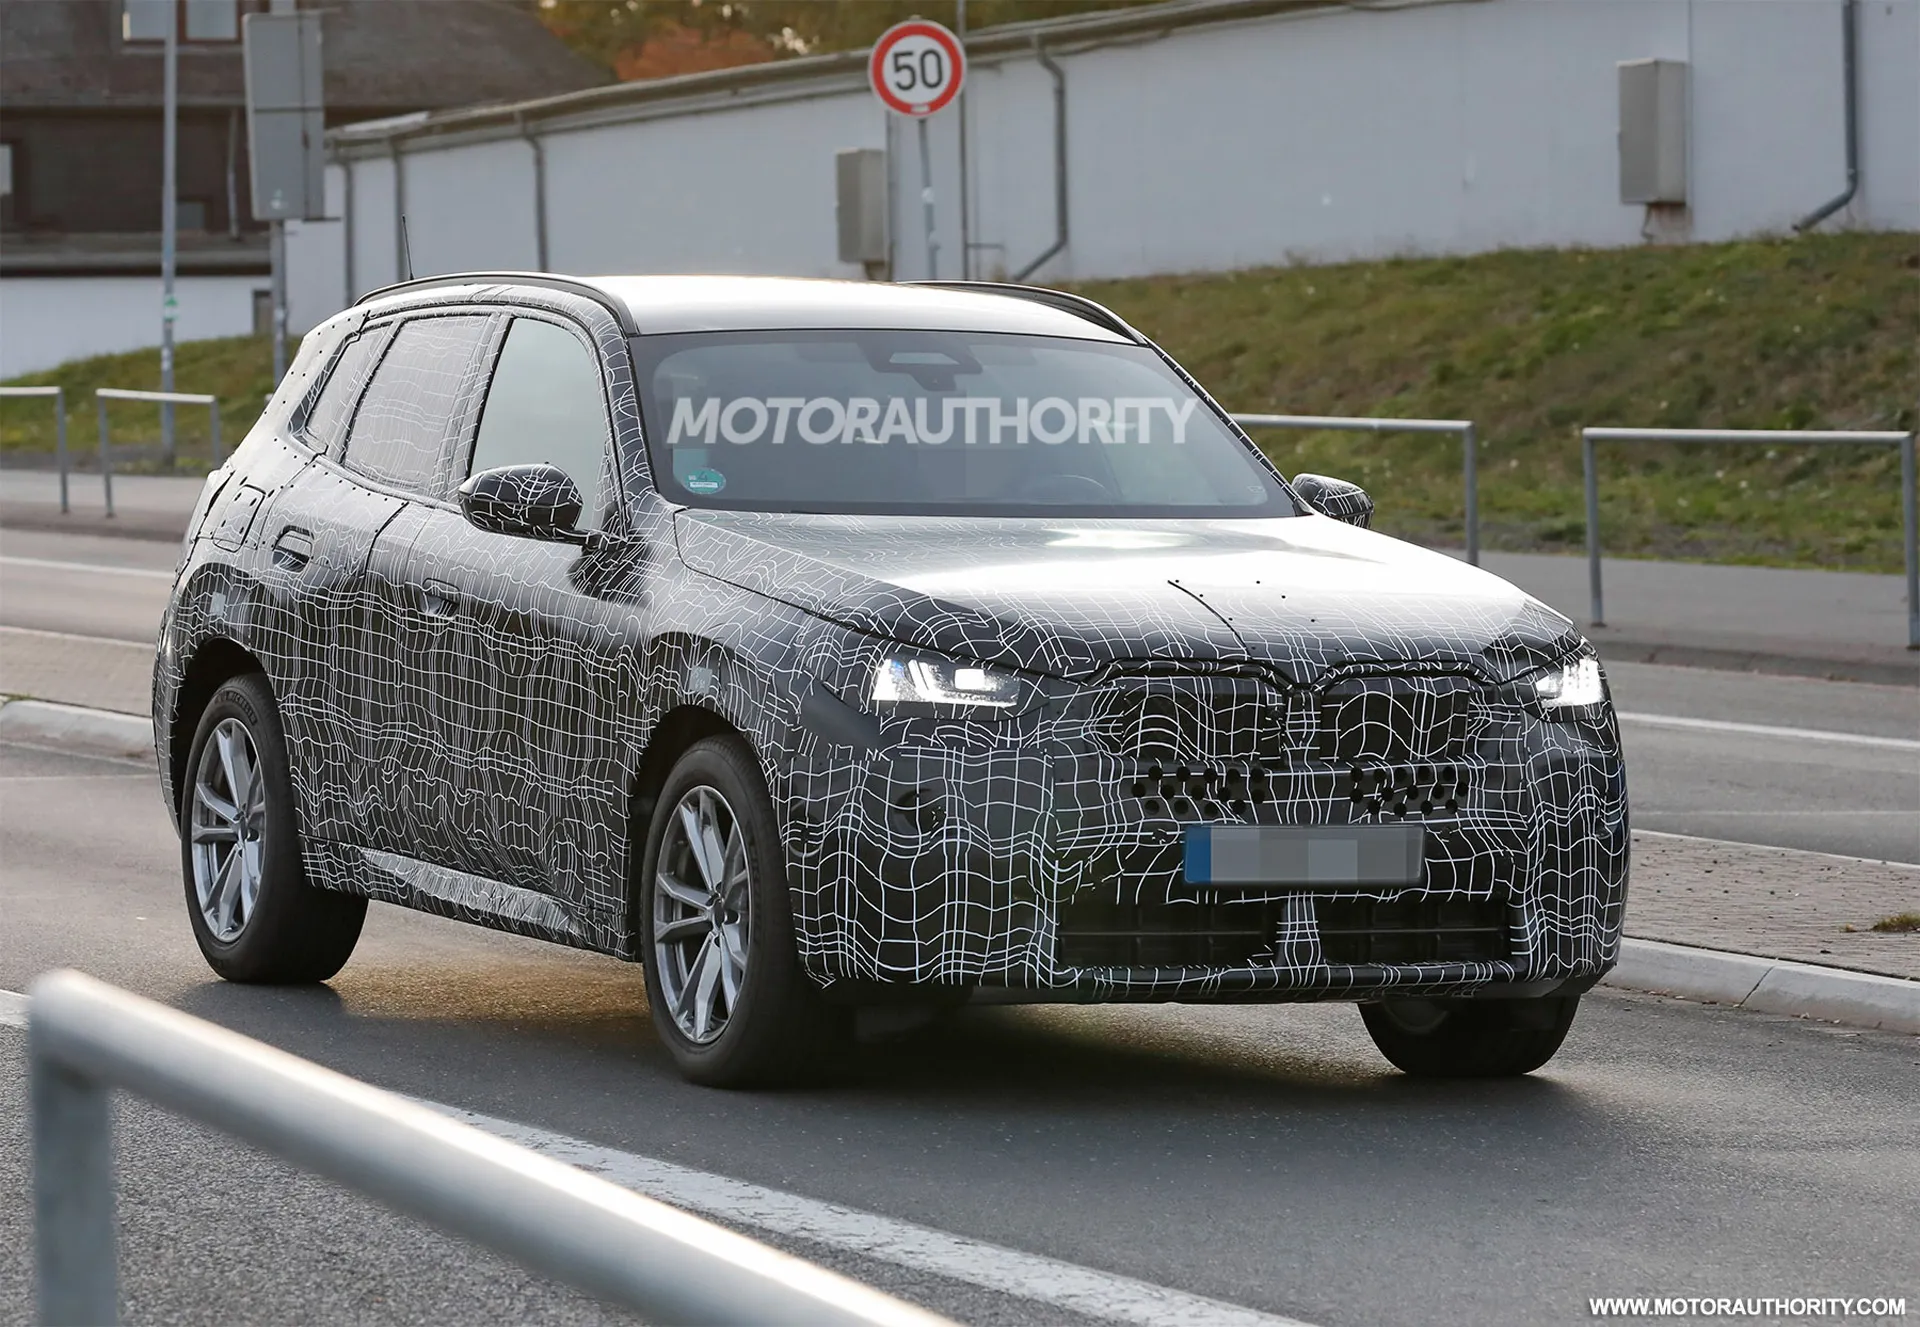 2025 BMW X3 Rendered In Production Form Based On Spy Shots